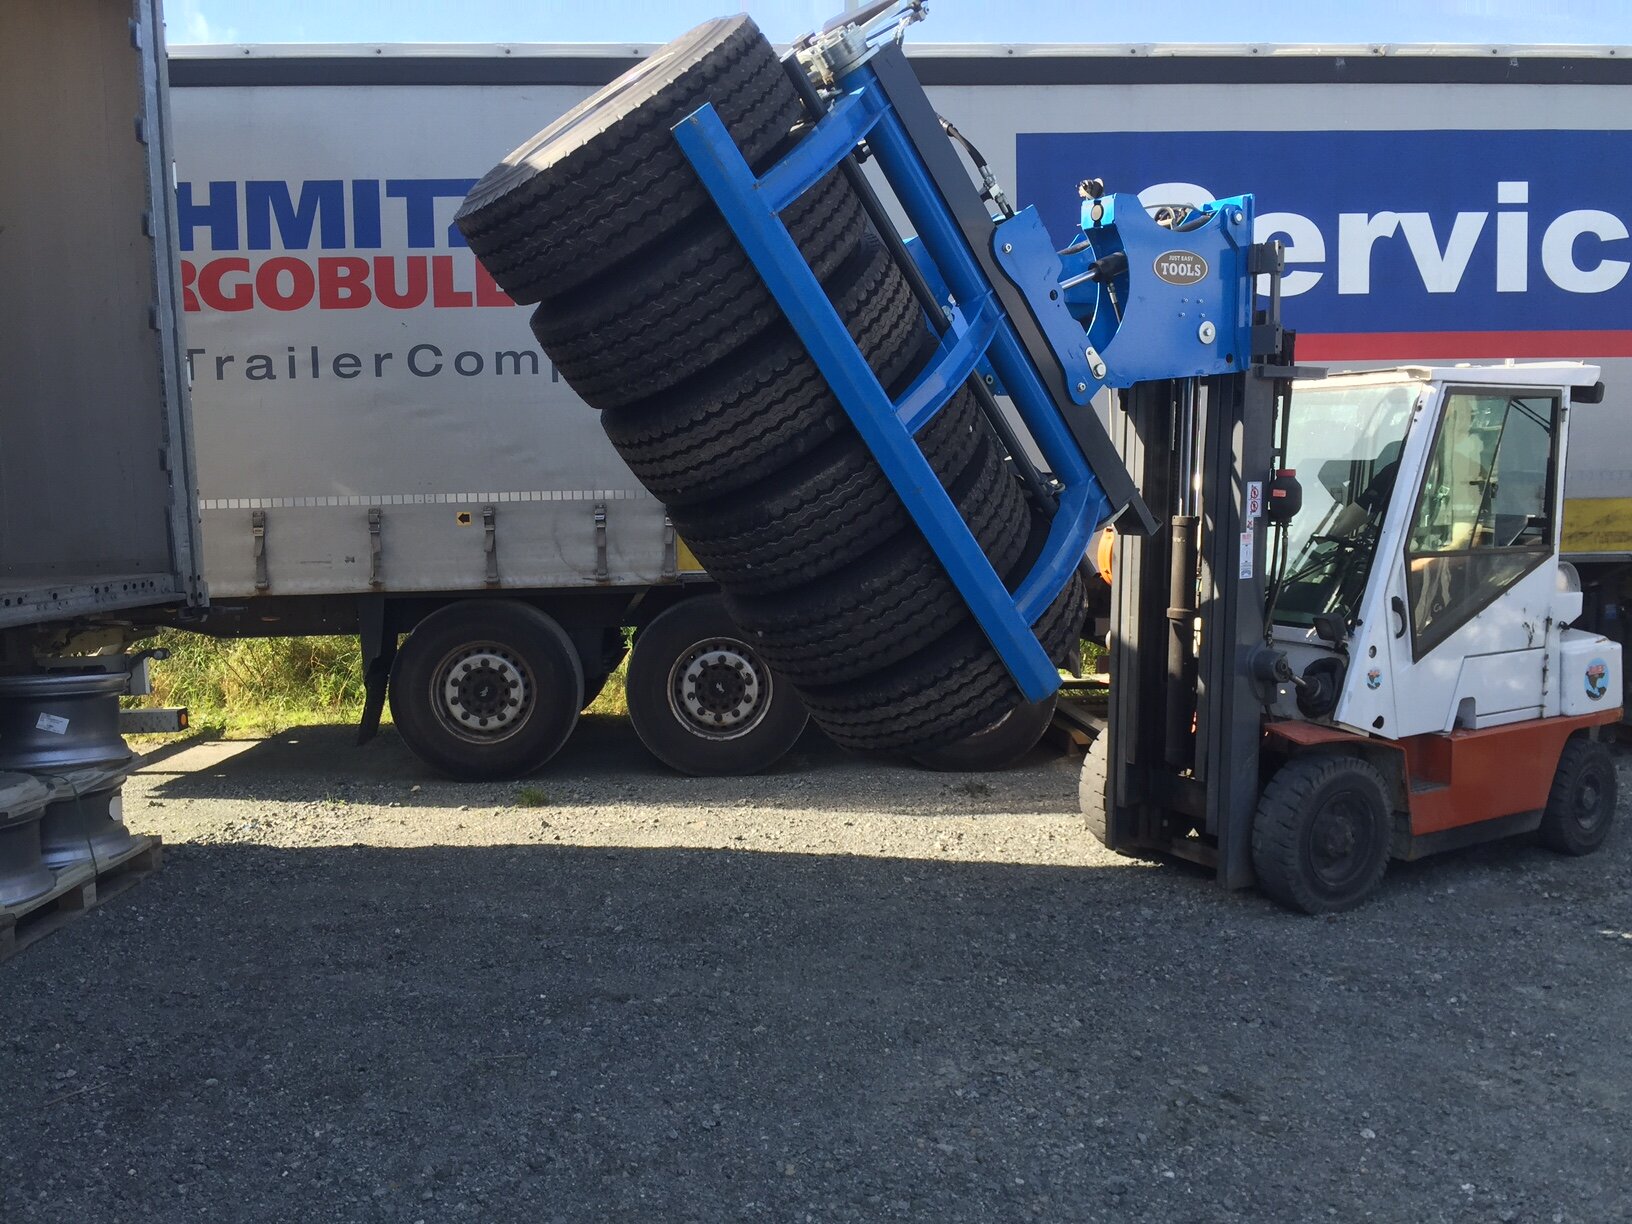 Easy Stacker 1200 used for load/unload of truck tyres at Schmitz Cargobull